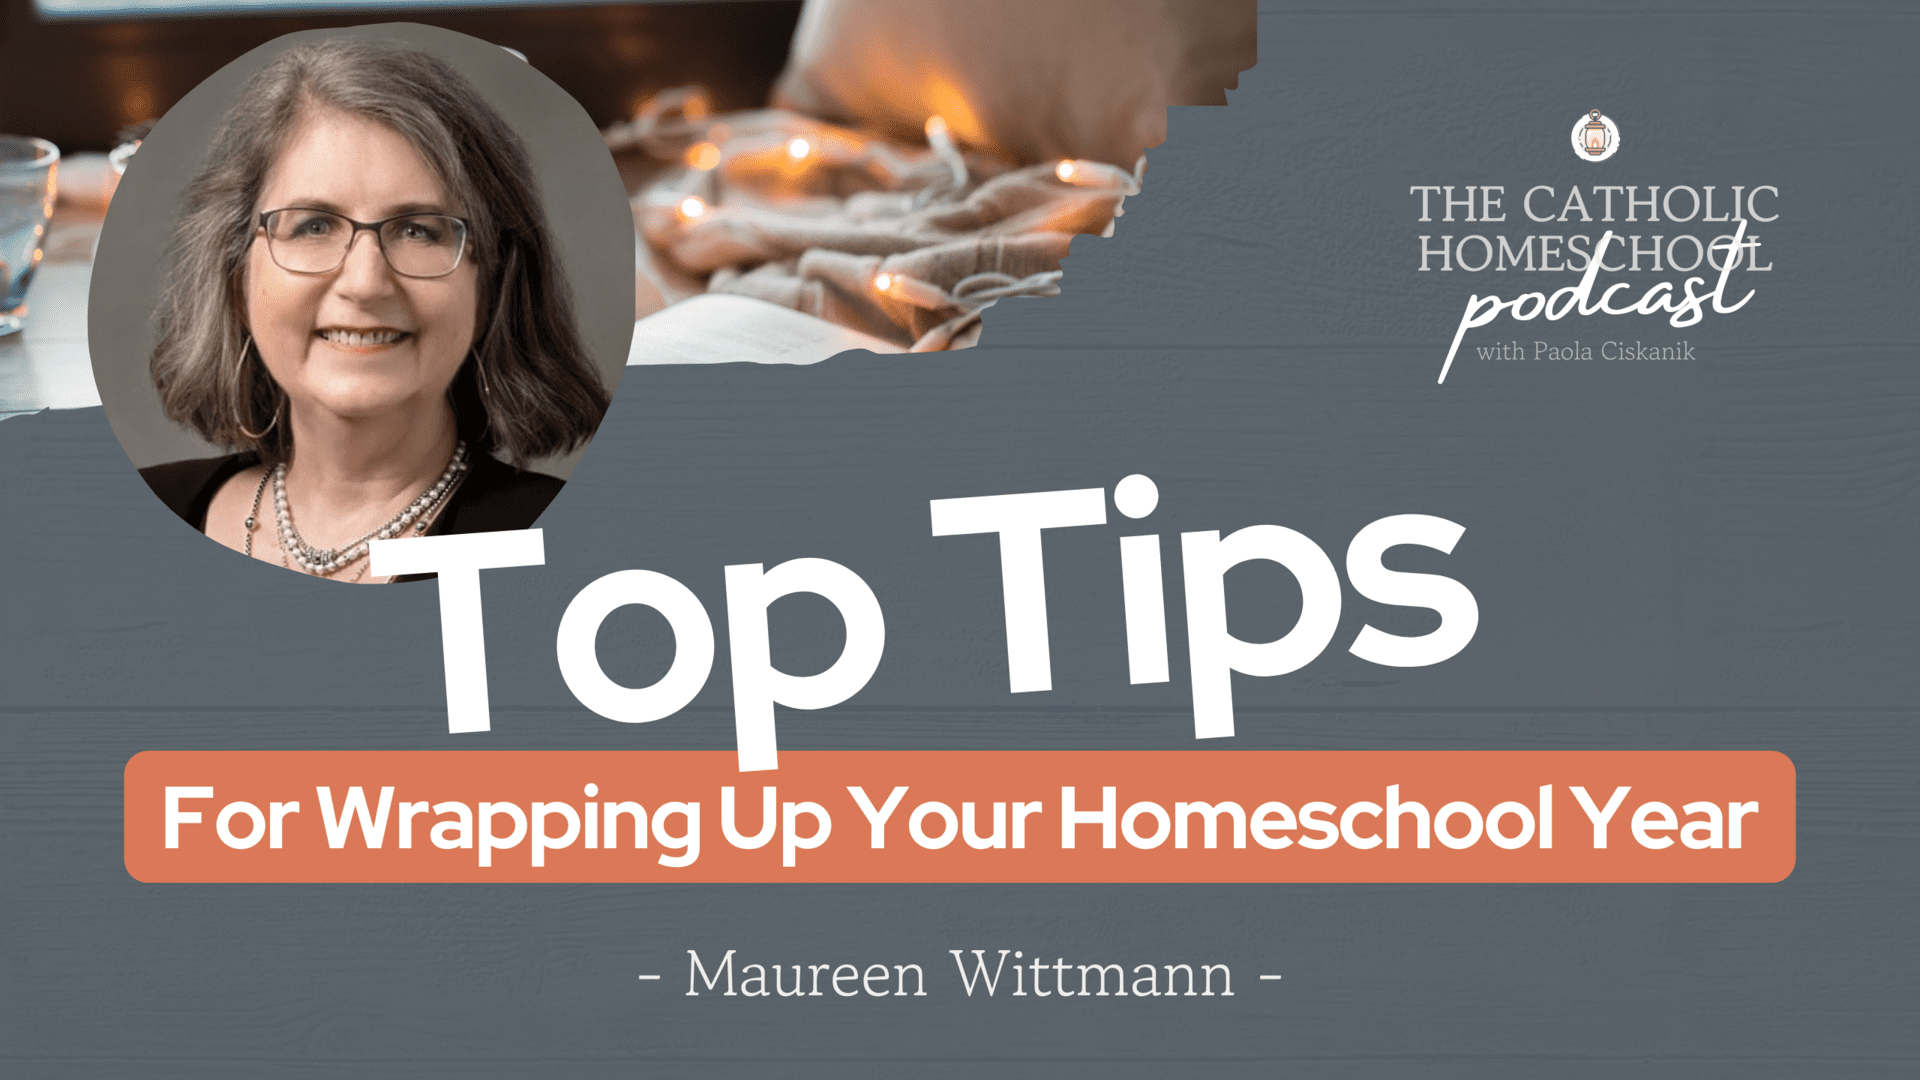 Maureen Wittmann | Tops Tips for Wrapping Up the Year | The Catholic Homeschool Podcast